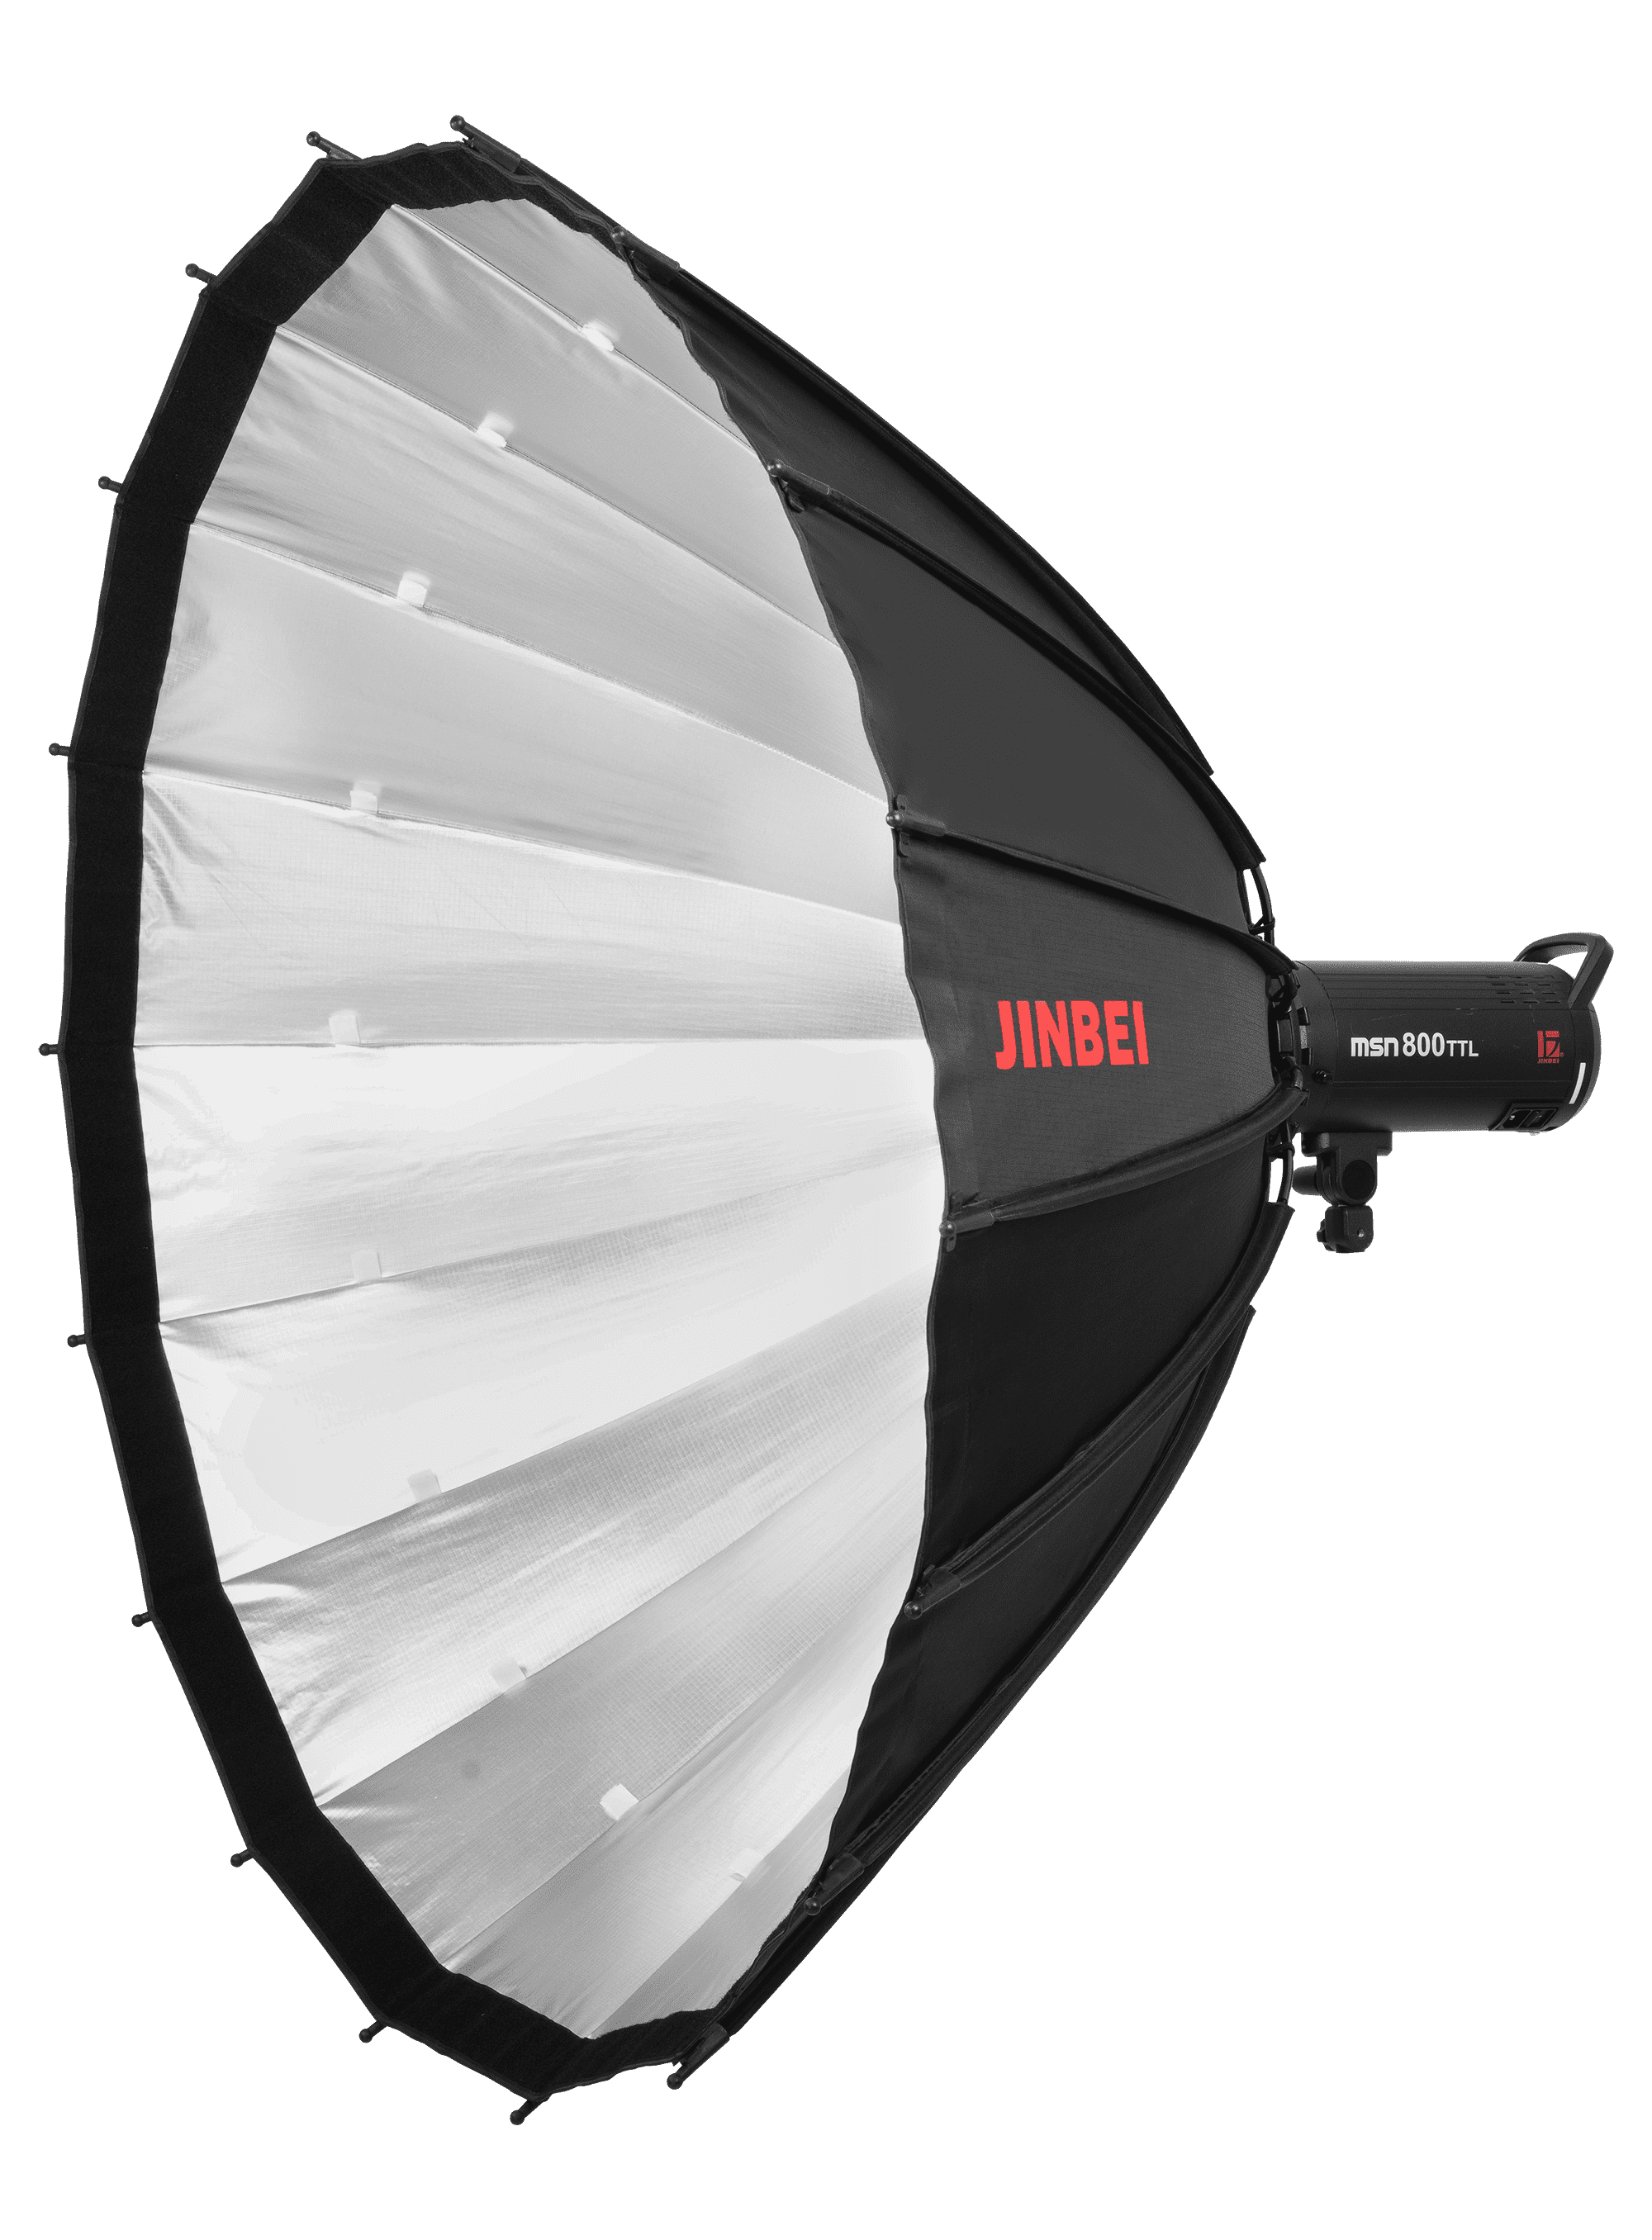 Softbox Jinbei Reflective 18 que 140cm grid với zoom forcus